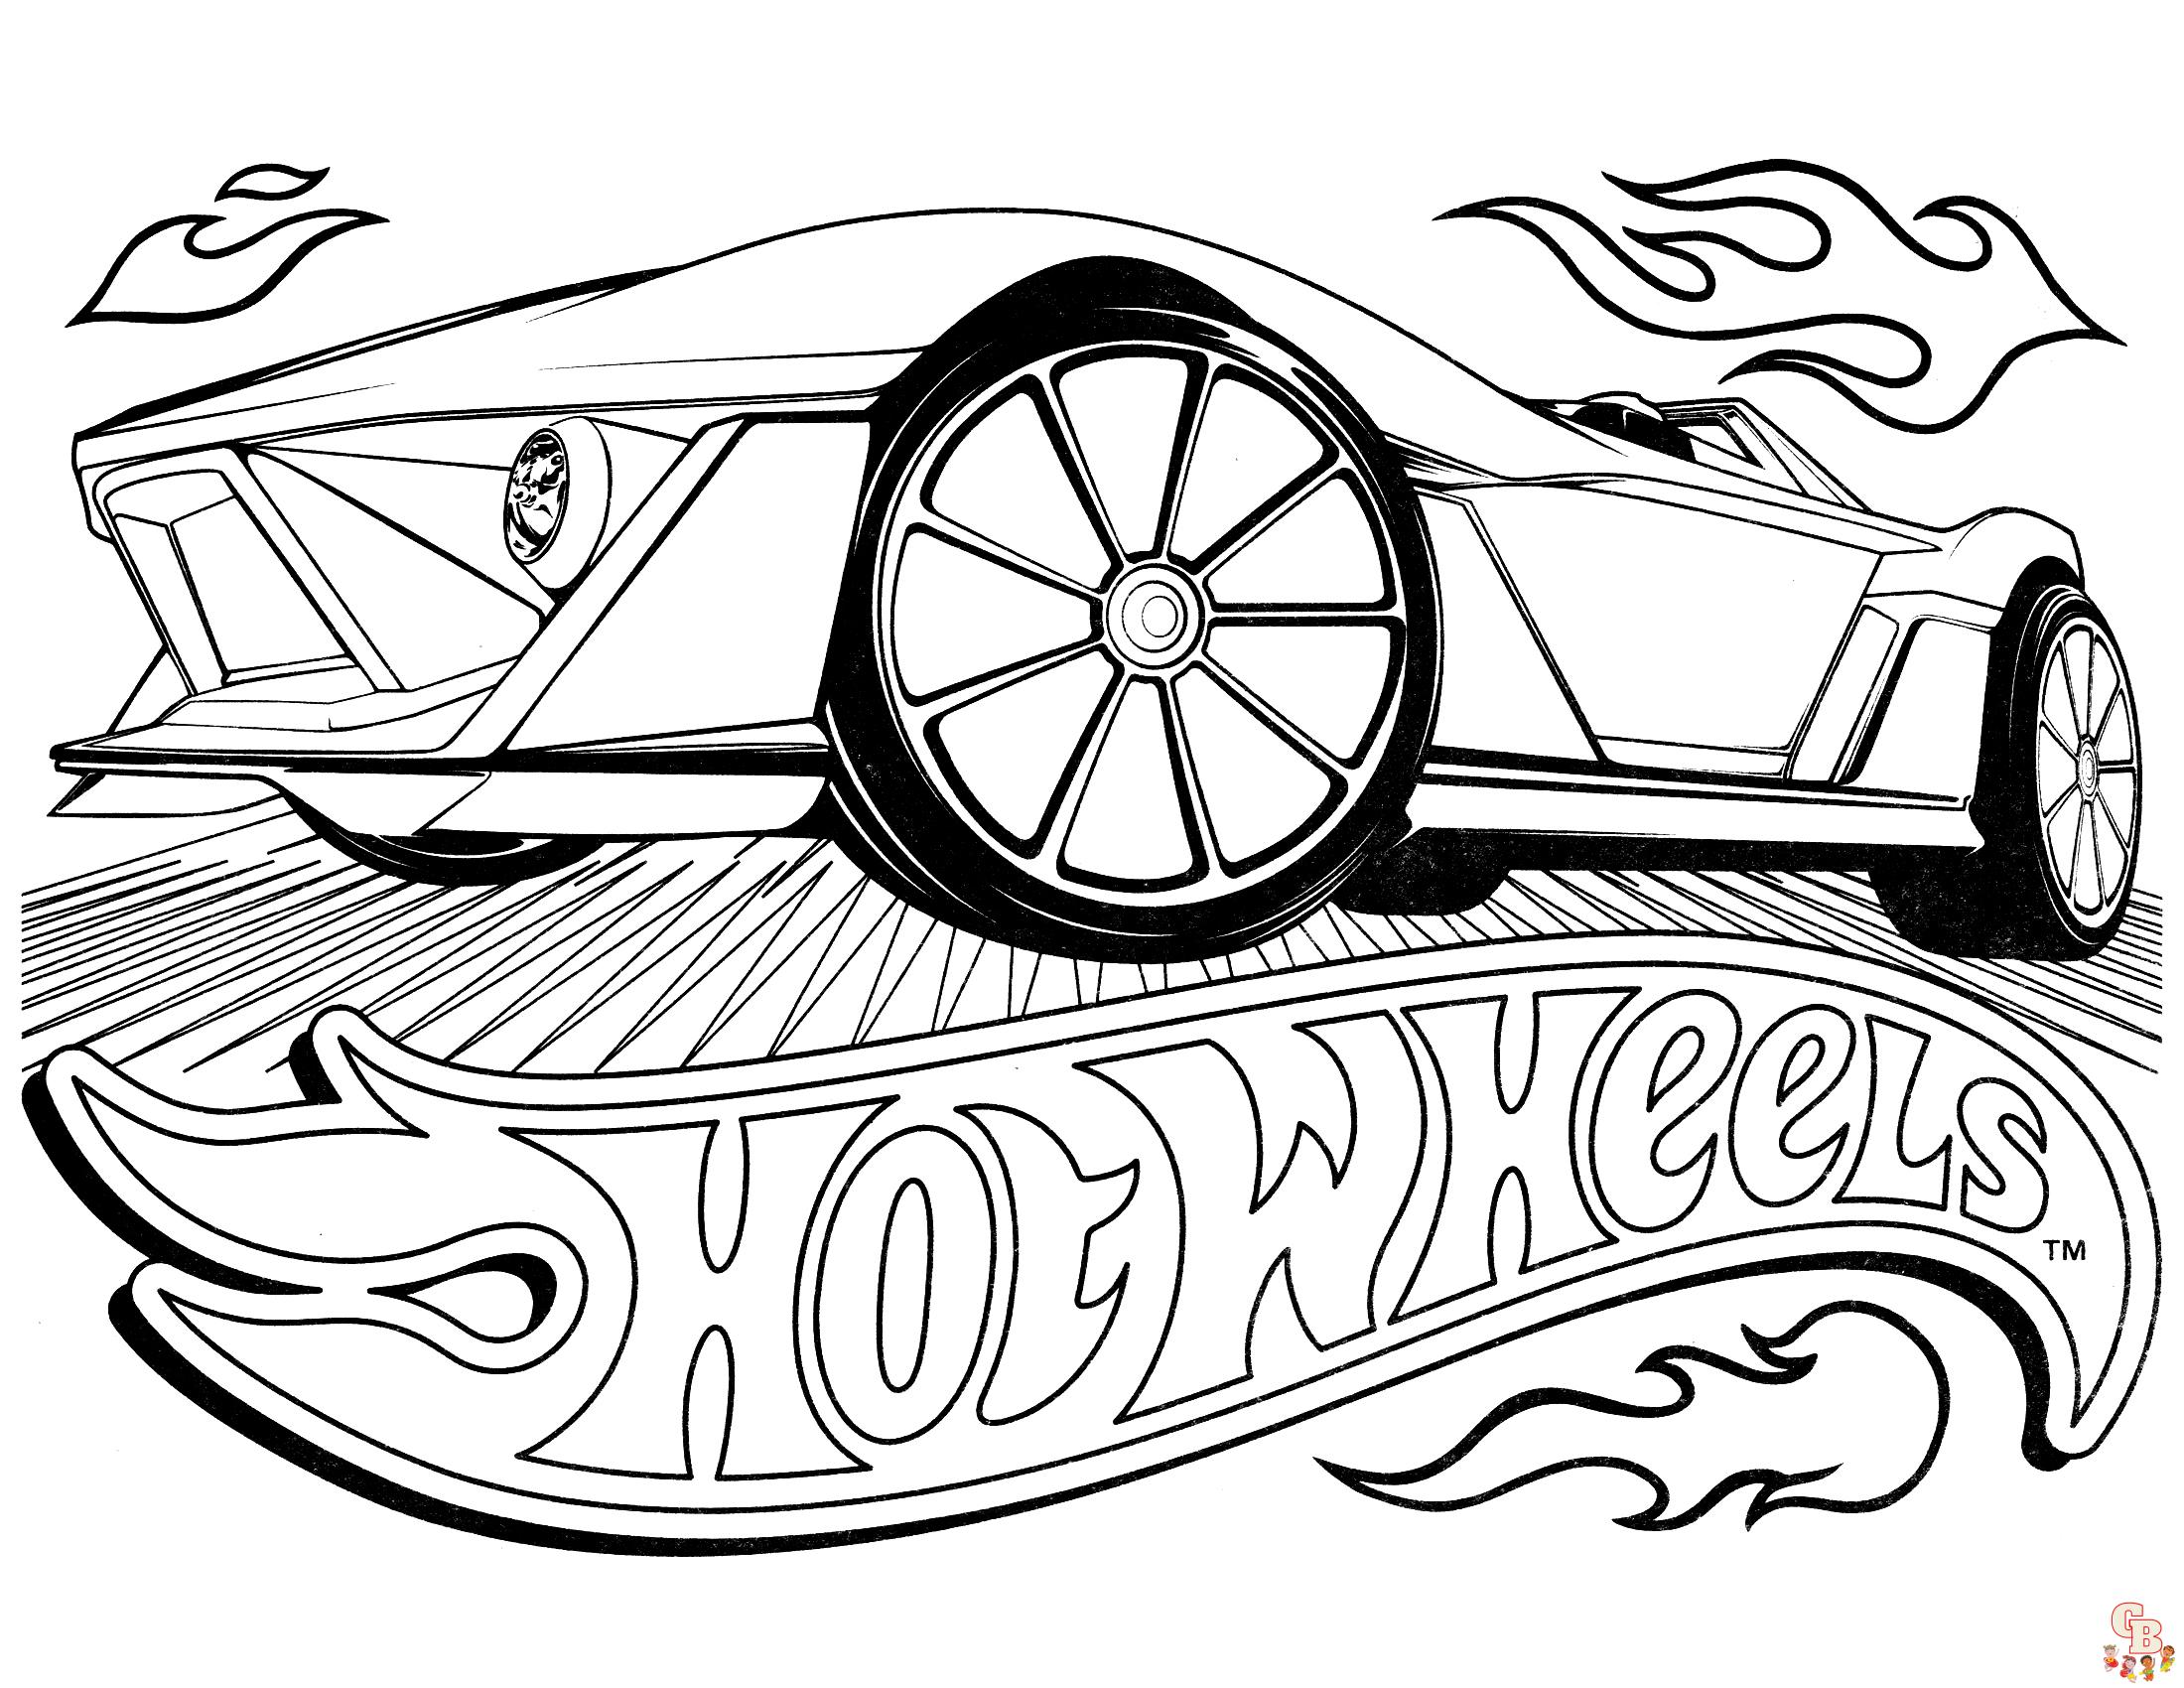 Hot wheels Coloring Pages: Fun and Free Printable Sheets for Kids